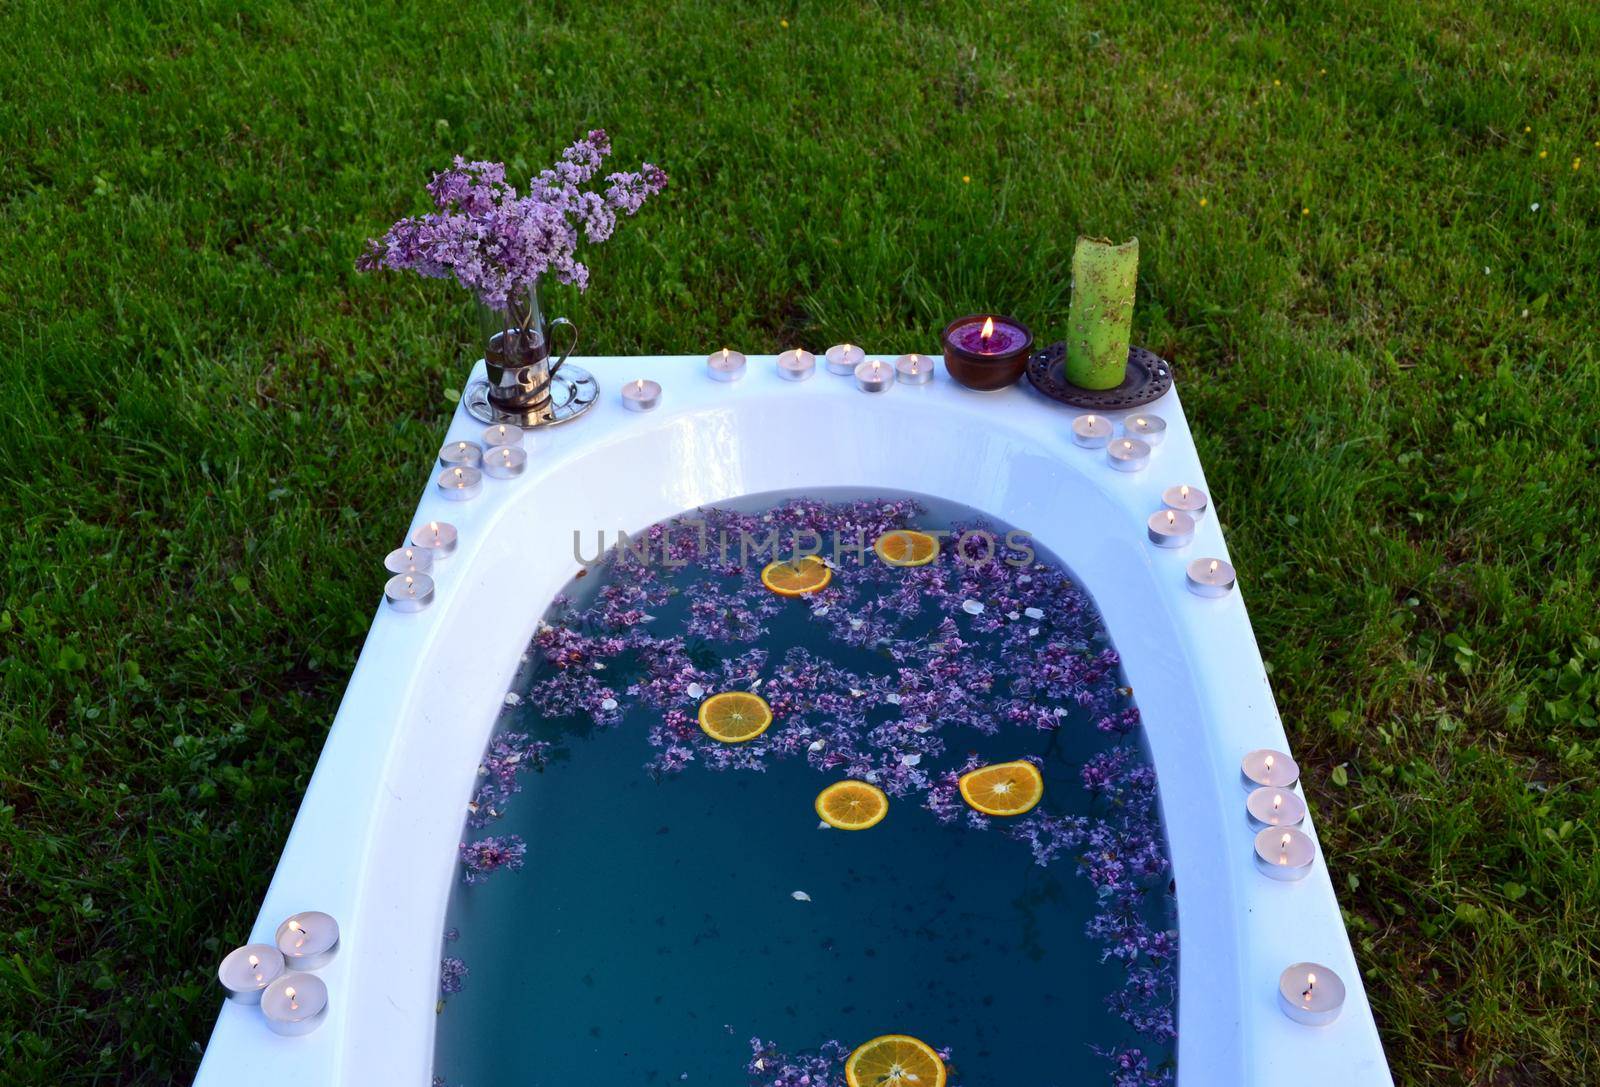 Top view of a bathtub with blue water and lilacs flowers on the grass by hibrida13